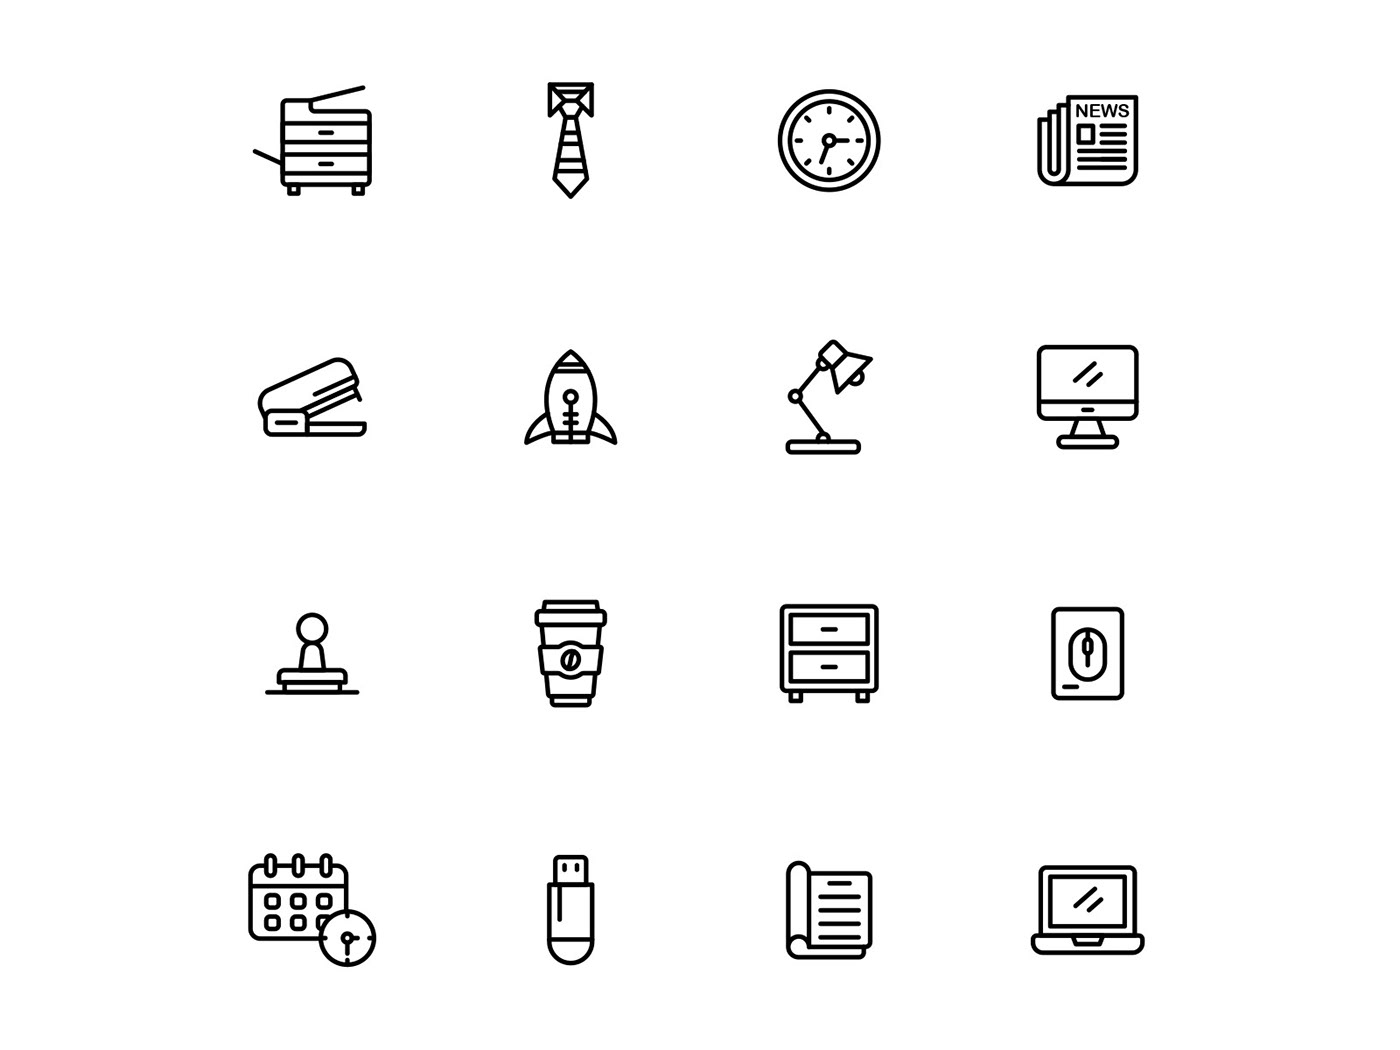 freebie icon design  icons download icons pack icons set vector design vector icon work vector workplace workplace icon